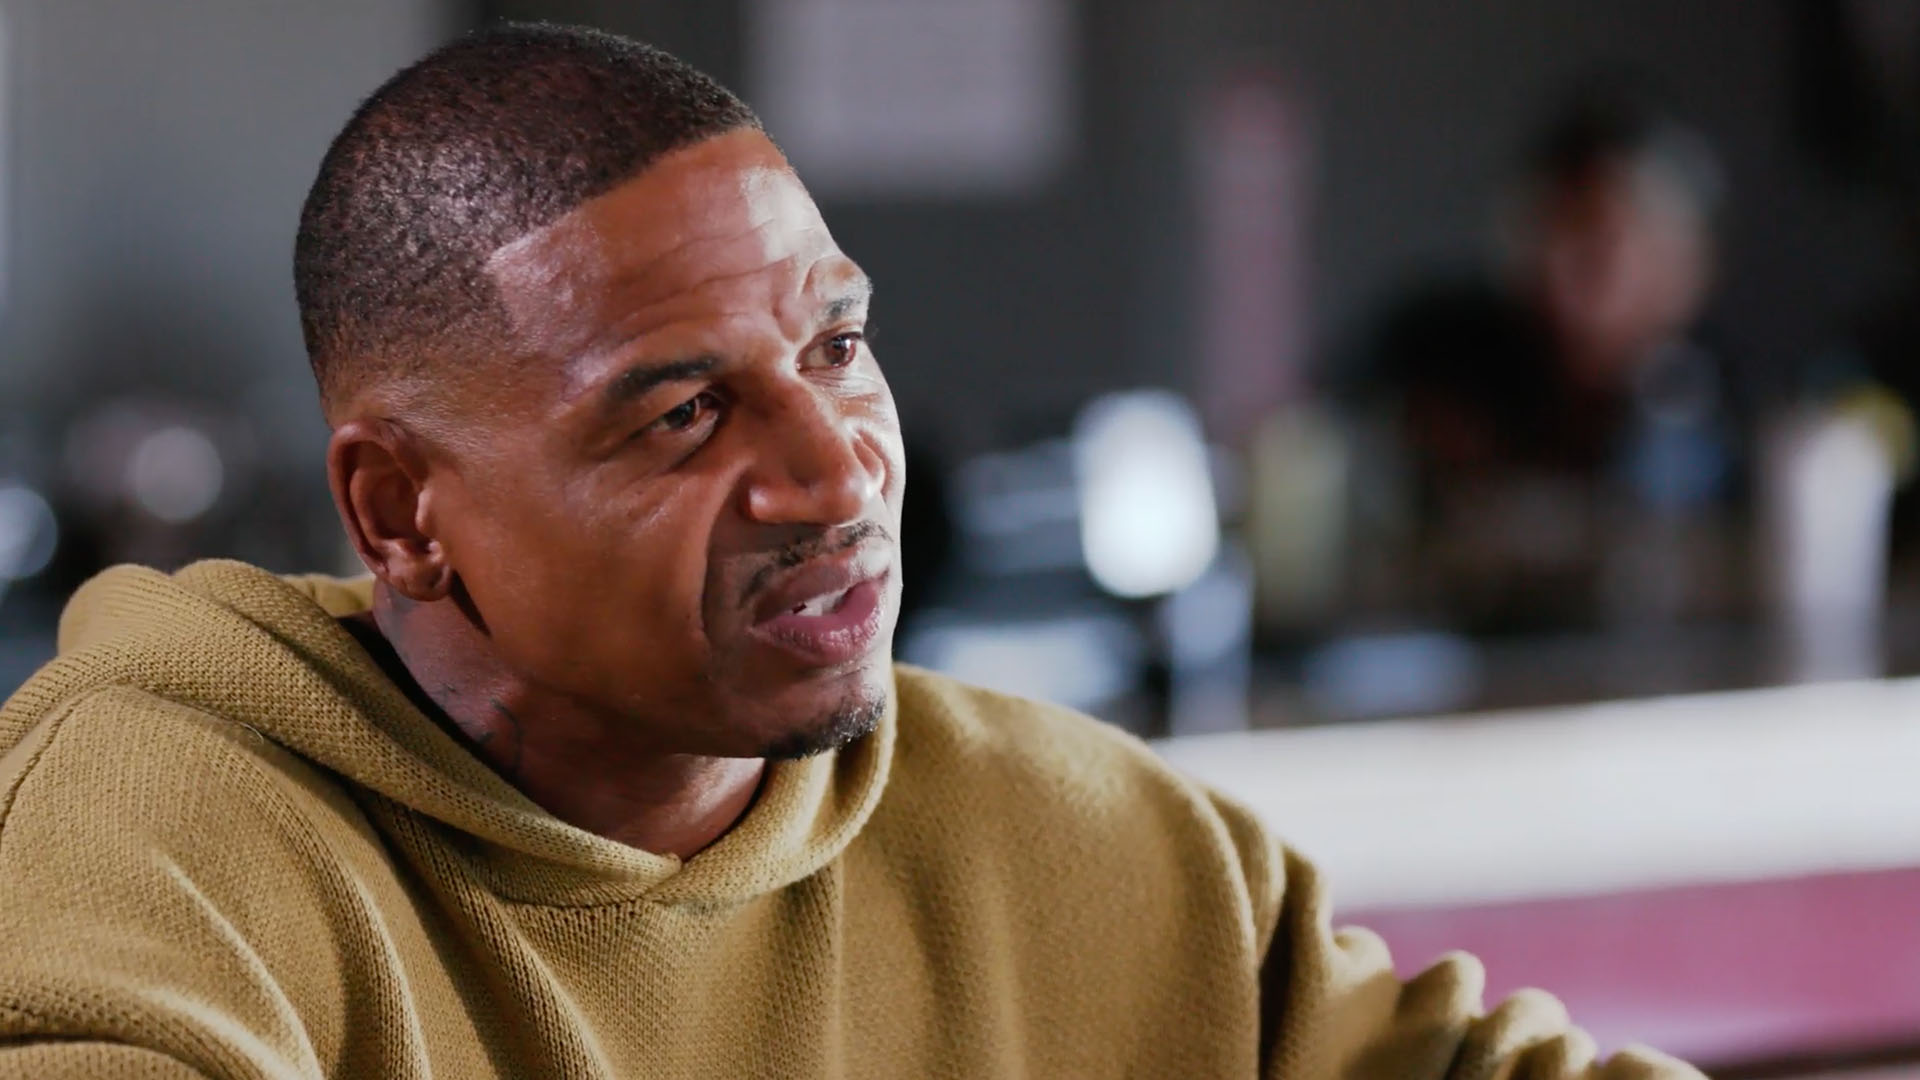 Watch Lessons From An OG: "Let the OGs Handle It!" | Growing Up Hip Hop Video Extras